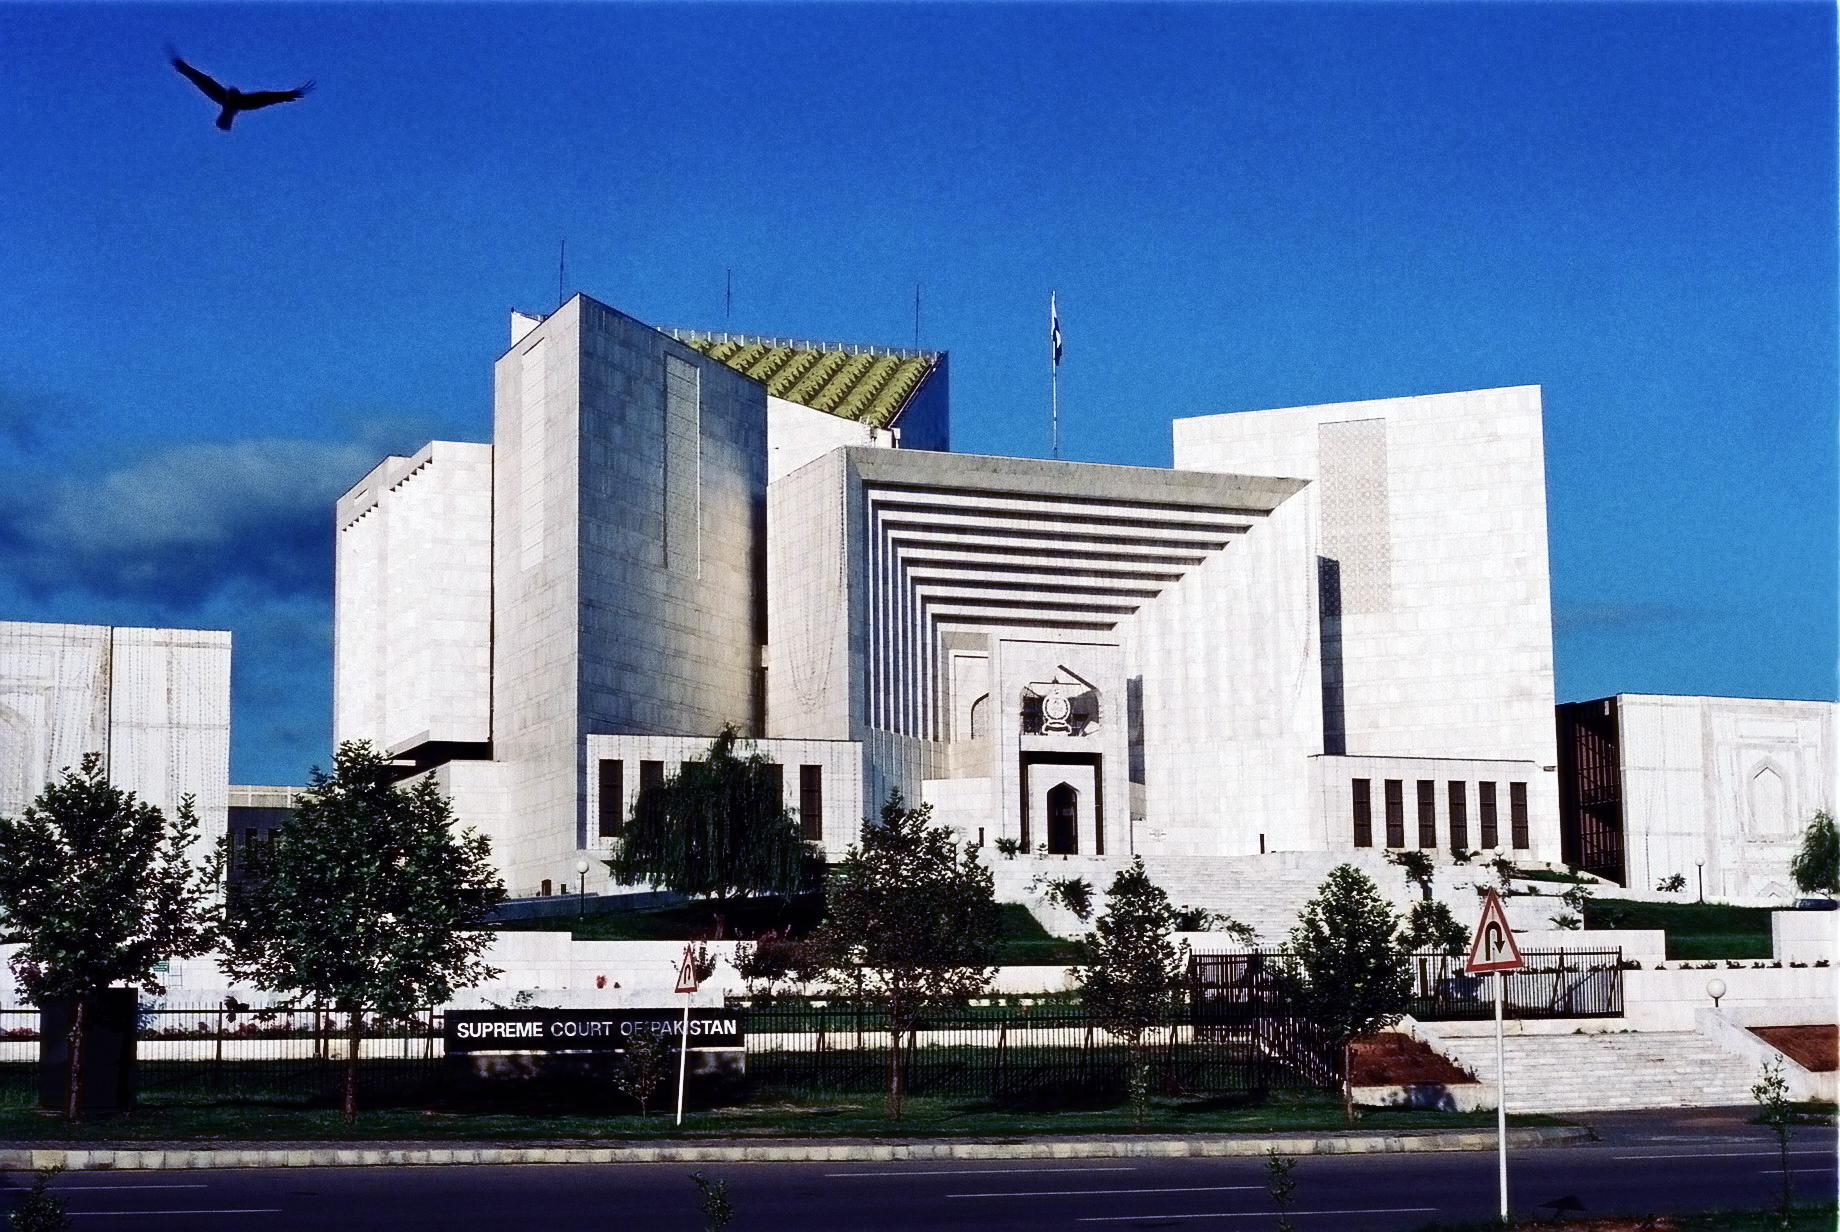 Pakistan dispatch: Supreme Court verdict on reserved seats will be pivotal for Pakistan&#8217;s democracy